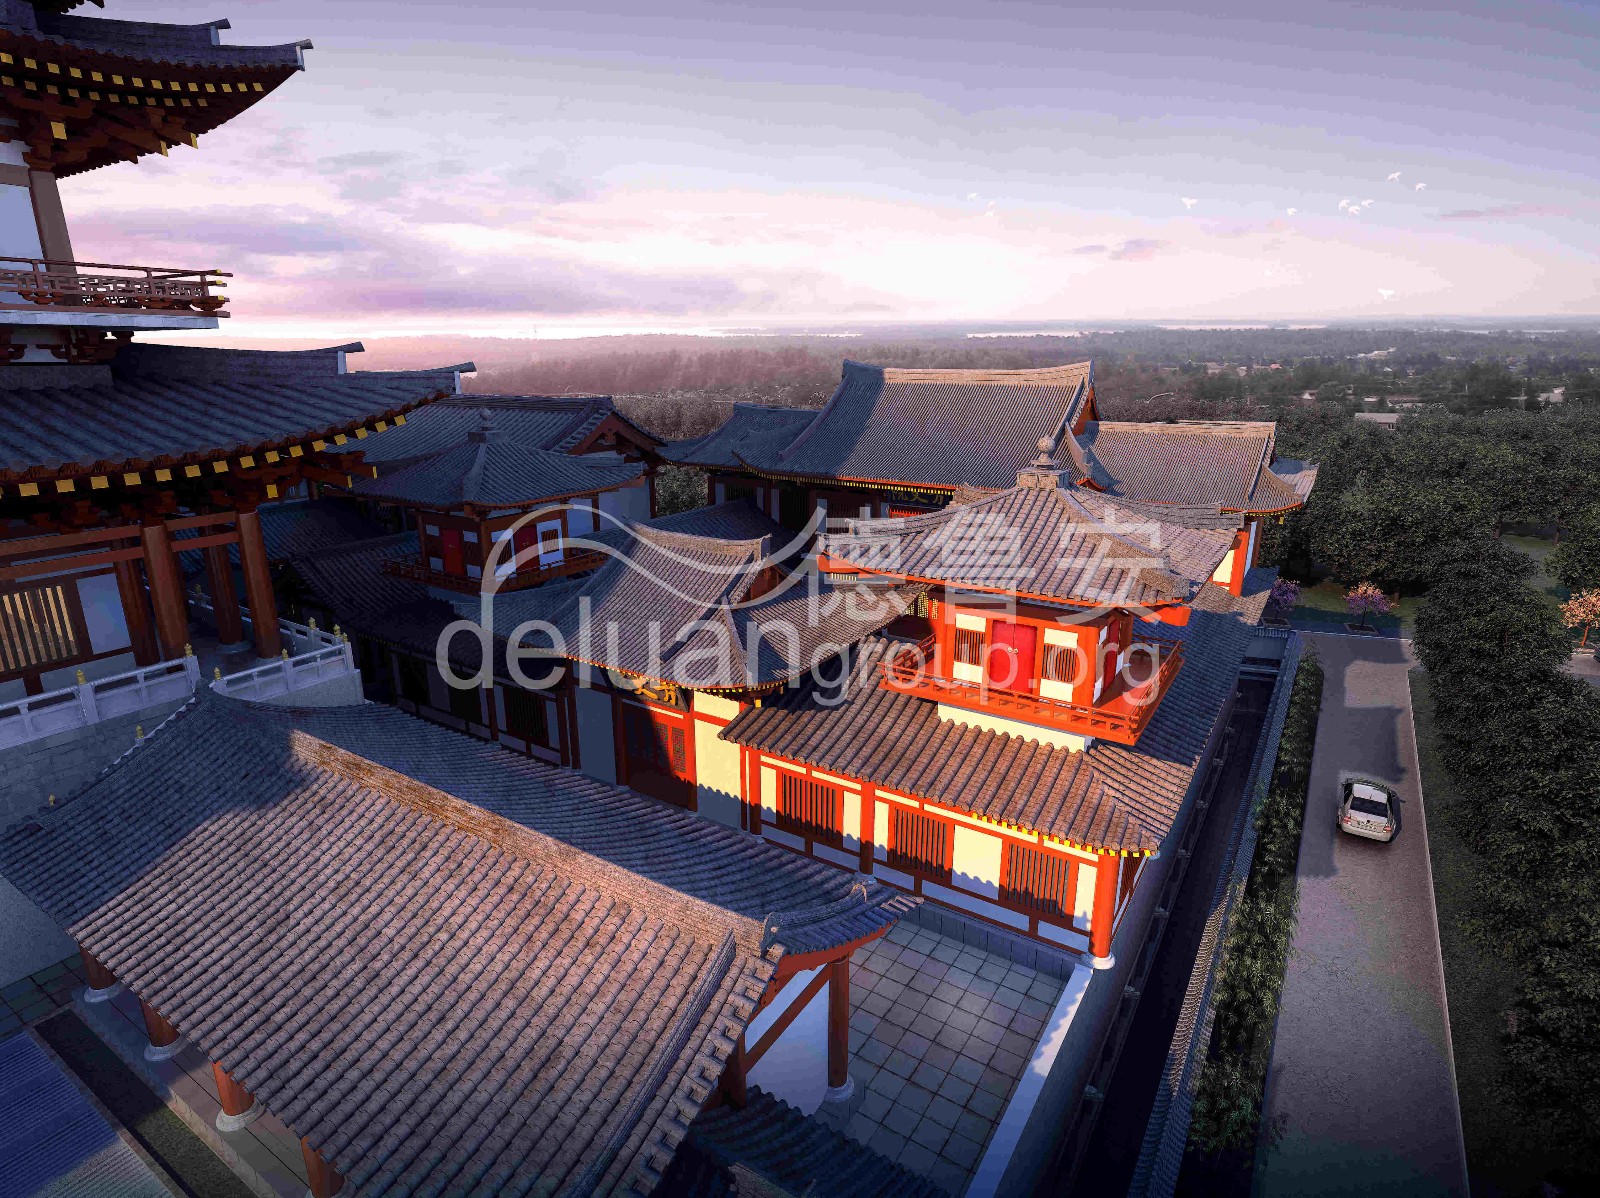 Planning and design of Baoqing temple in Xianghe0(图16)